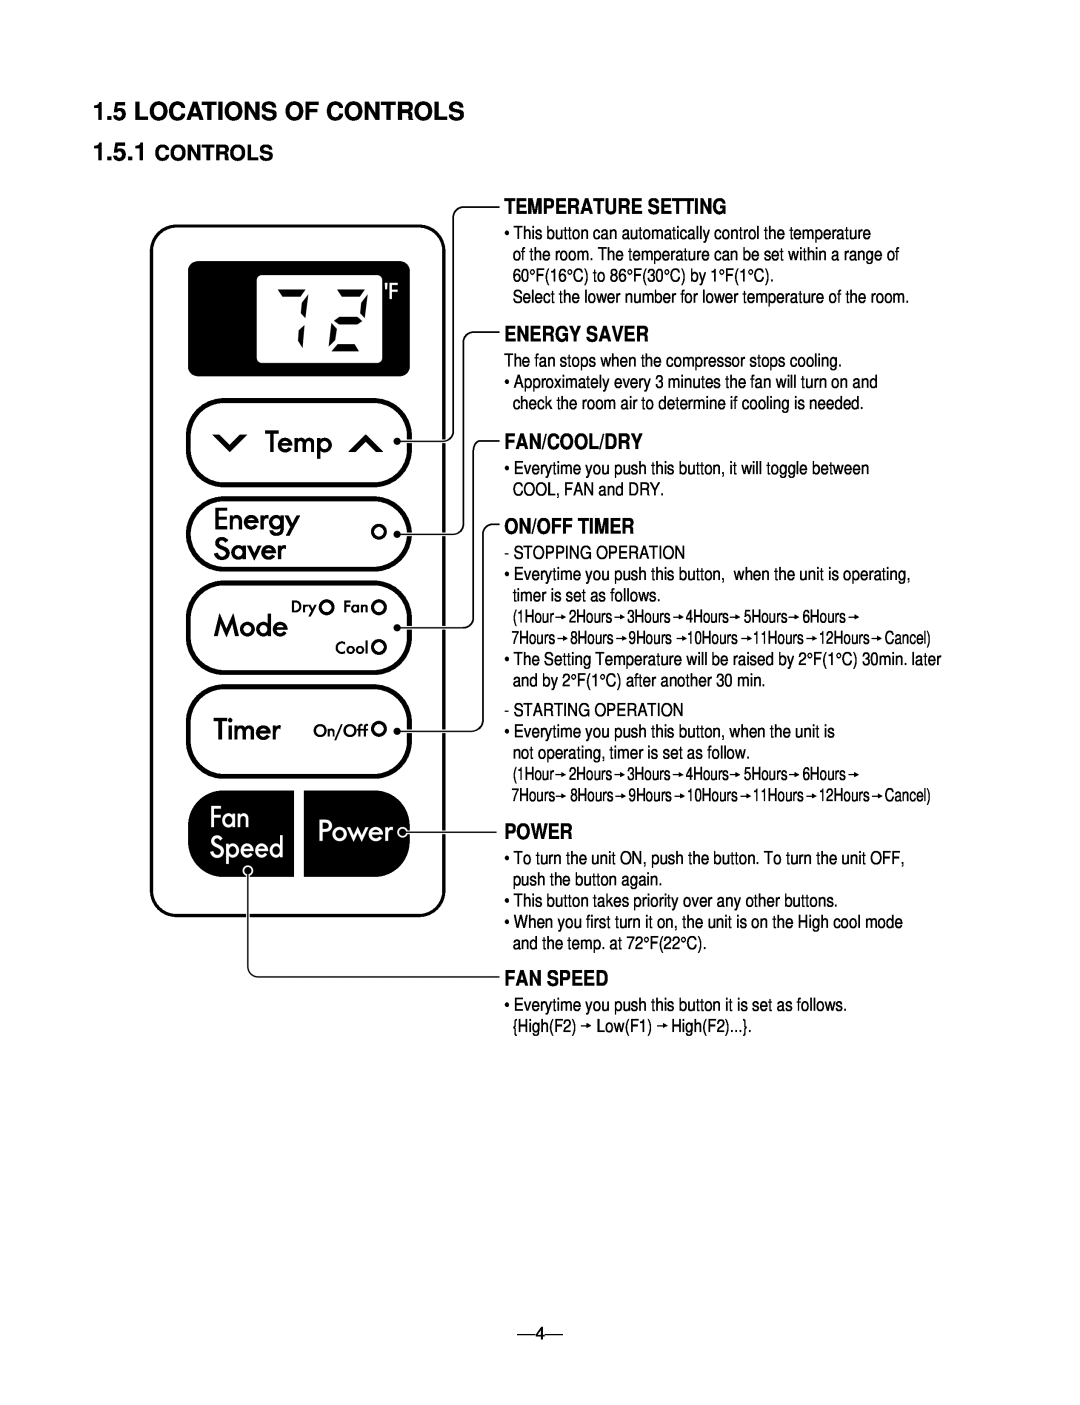 Goldstar M5203R 1.5LOCATIONS OF CONTROLS 1.5.1 CONTROLS, Temperature Setting, Energy Saver, Fan/Cool/Dry, On/Off Timer 